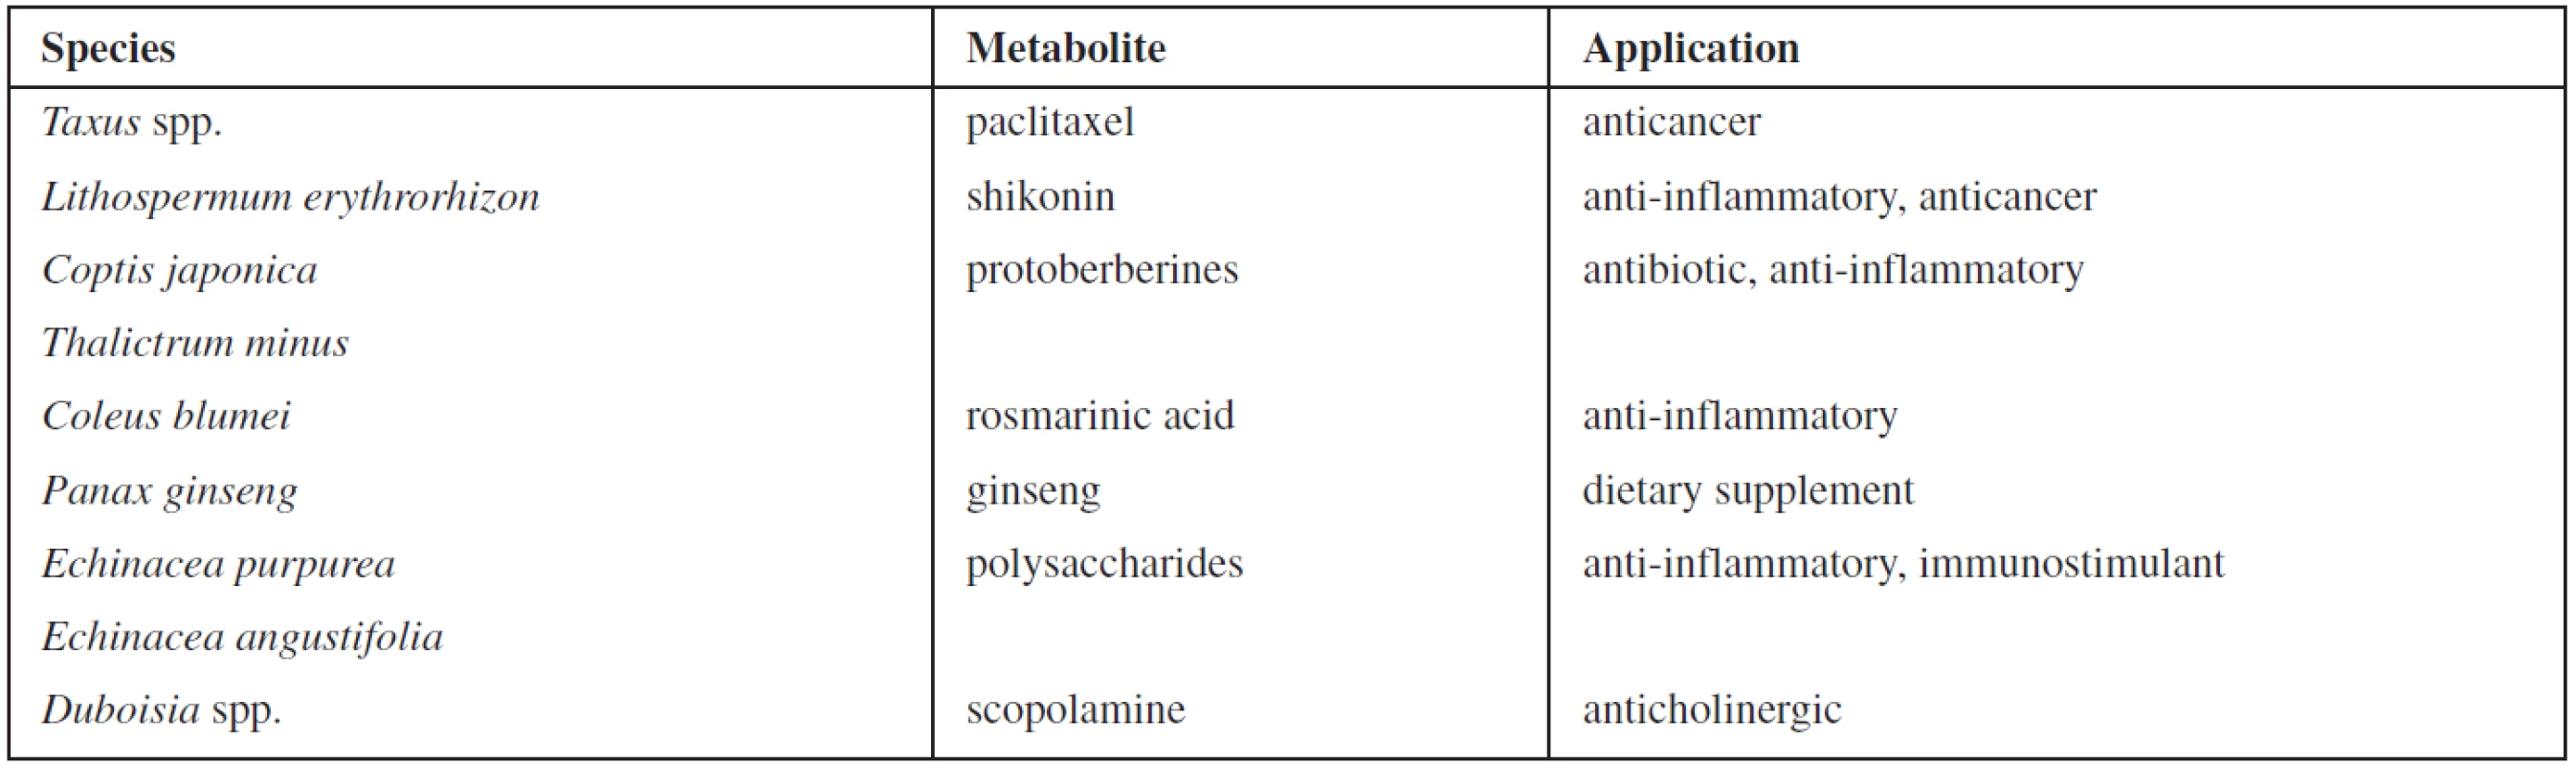 Examples of plant cell cultures used for the commercial production of high-value secondary metabolites &lt;sup&gt;4)&lt;/sup&gt;.